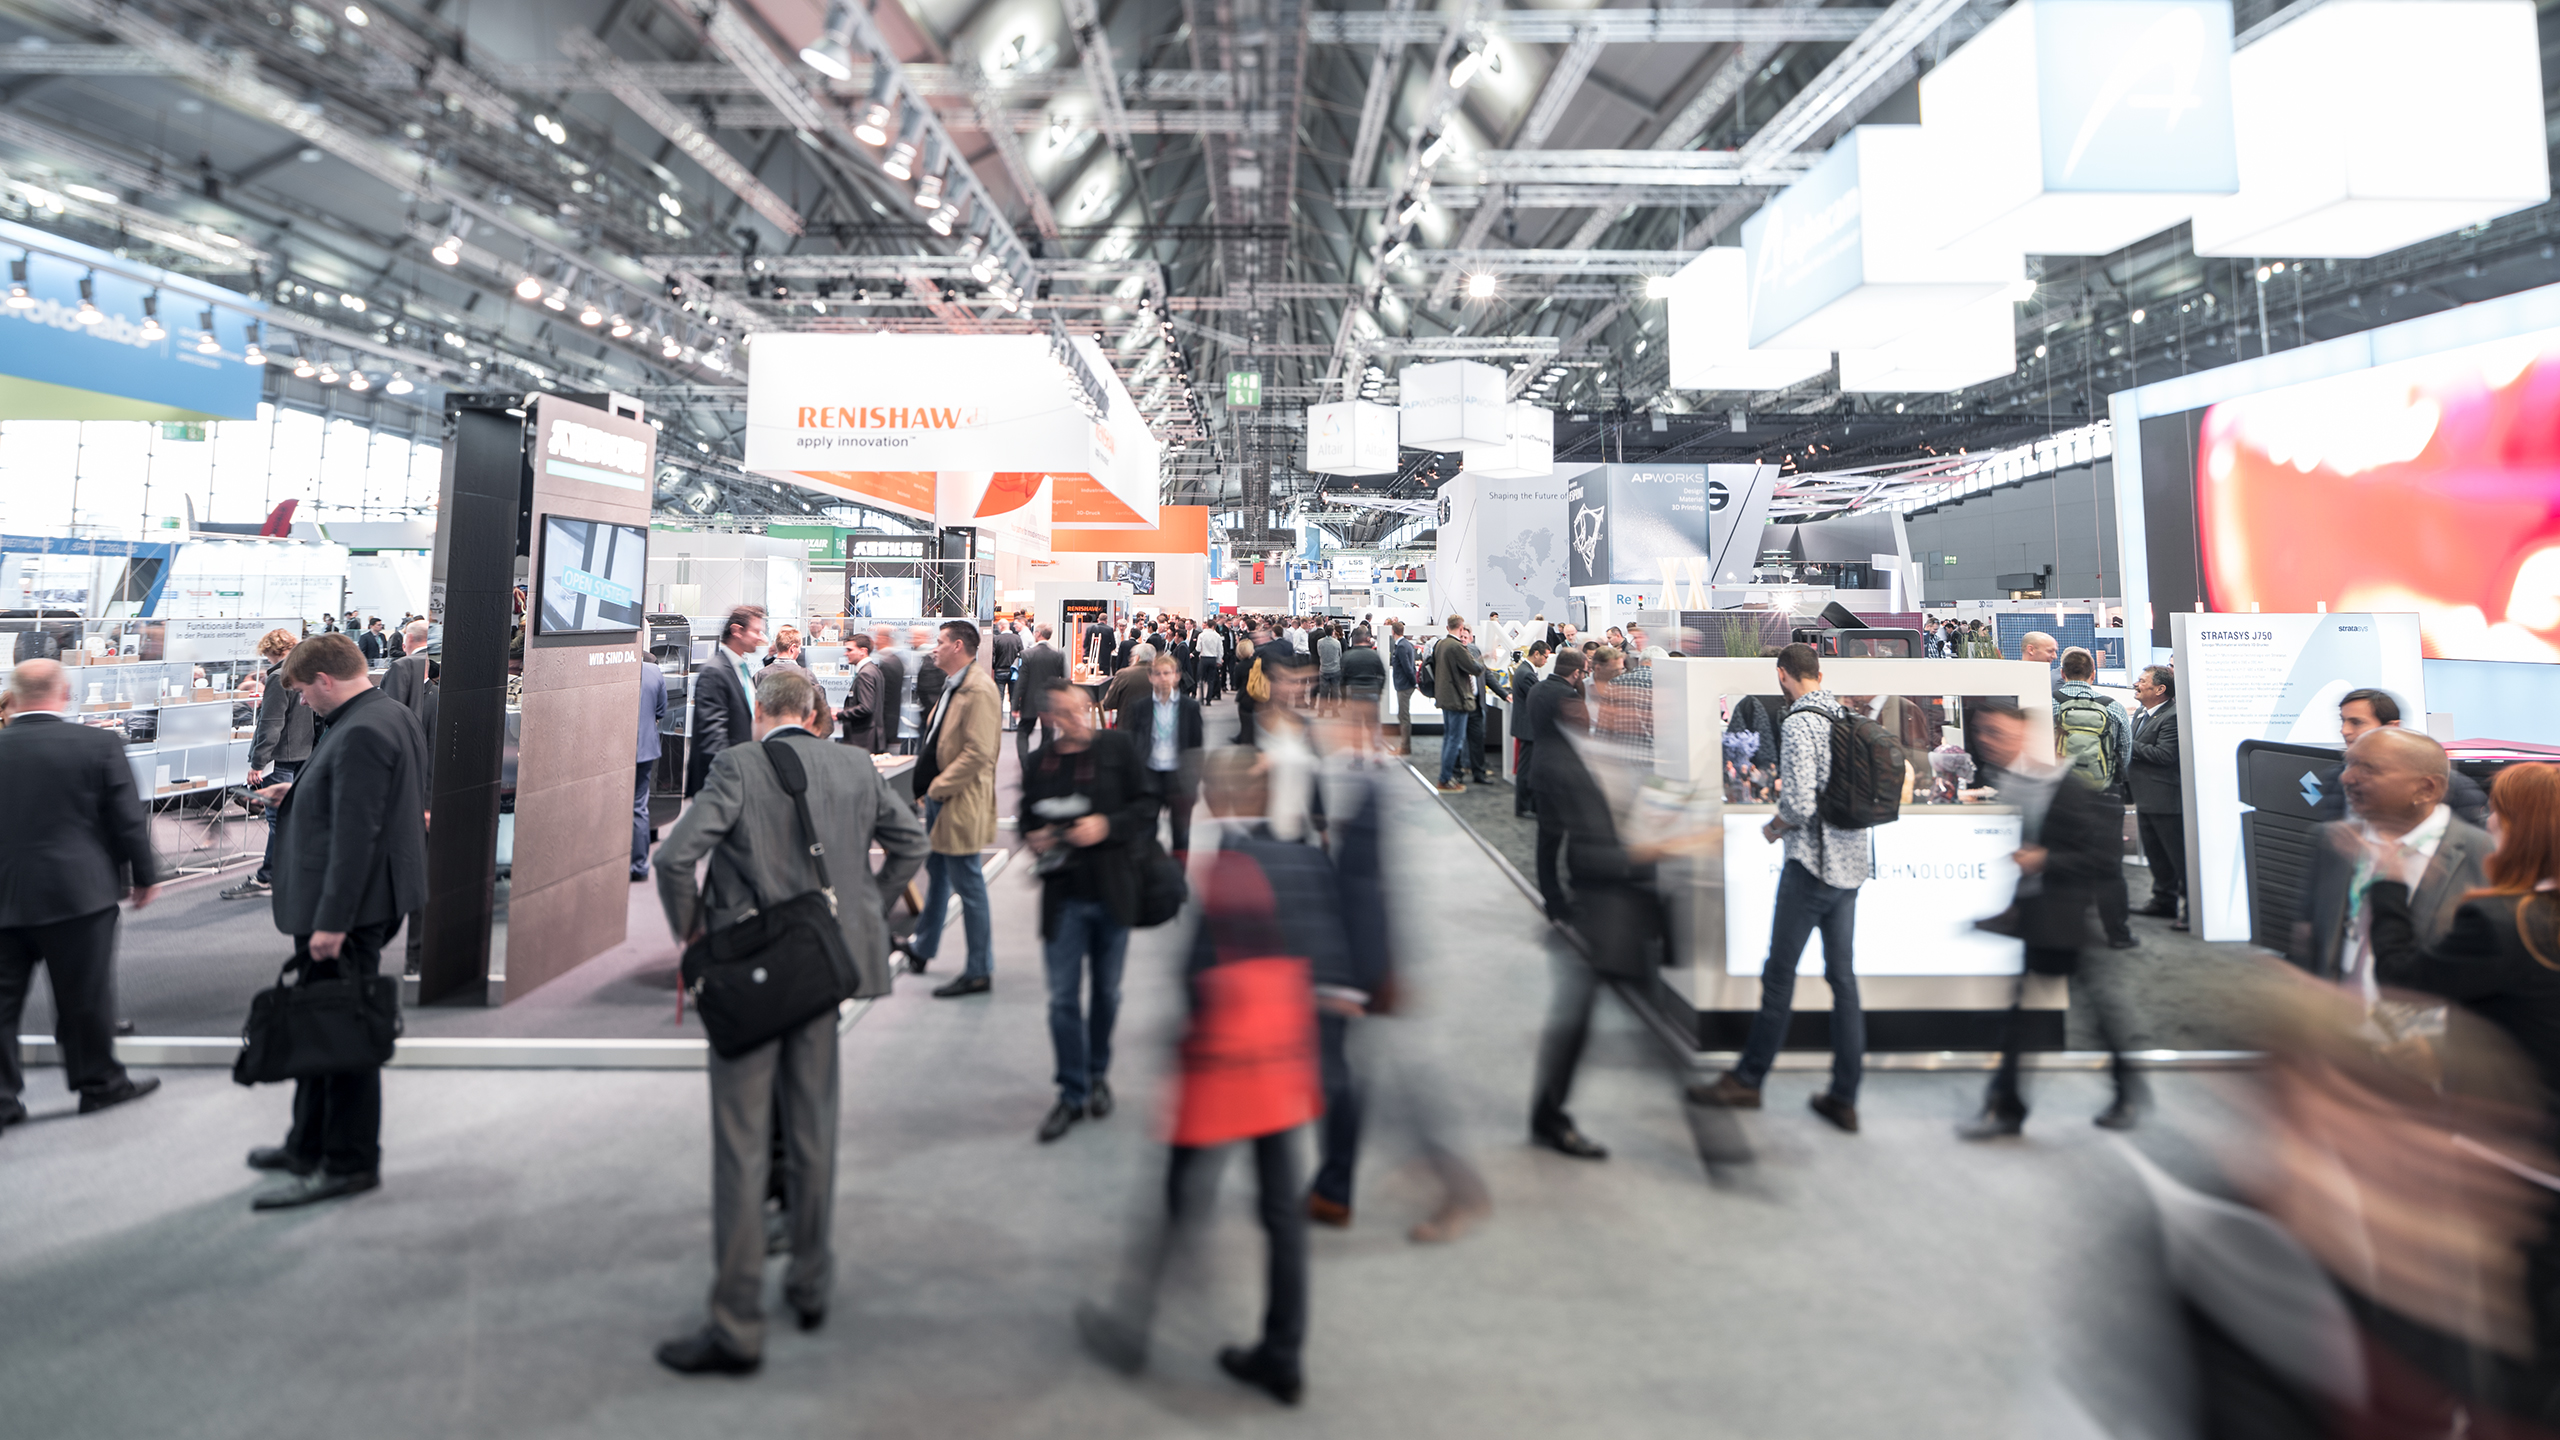 Formnext provides an opportunity to network with others in the additive manufacturing marketspace. Photo via Formnext.